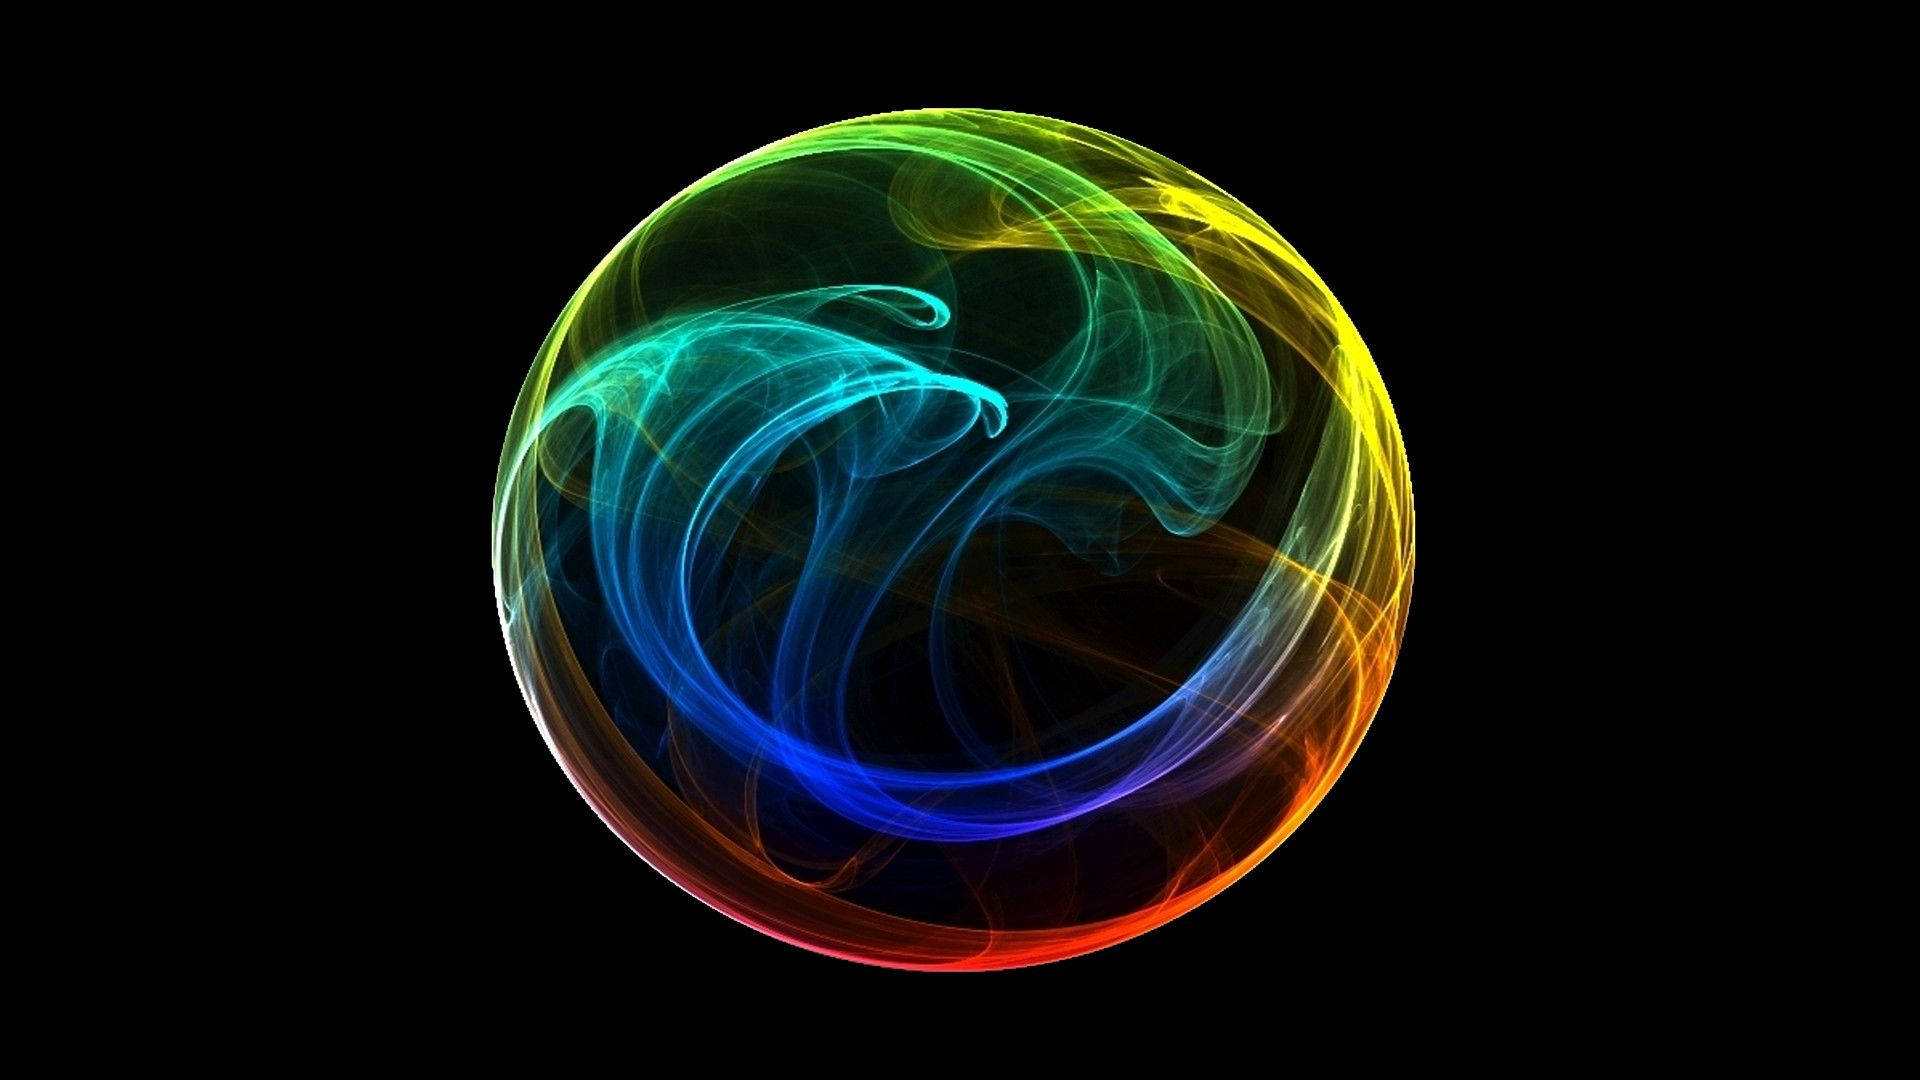 Animated colorful orb in the middle of black background HD wallpaper. 